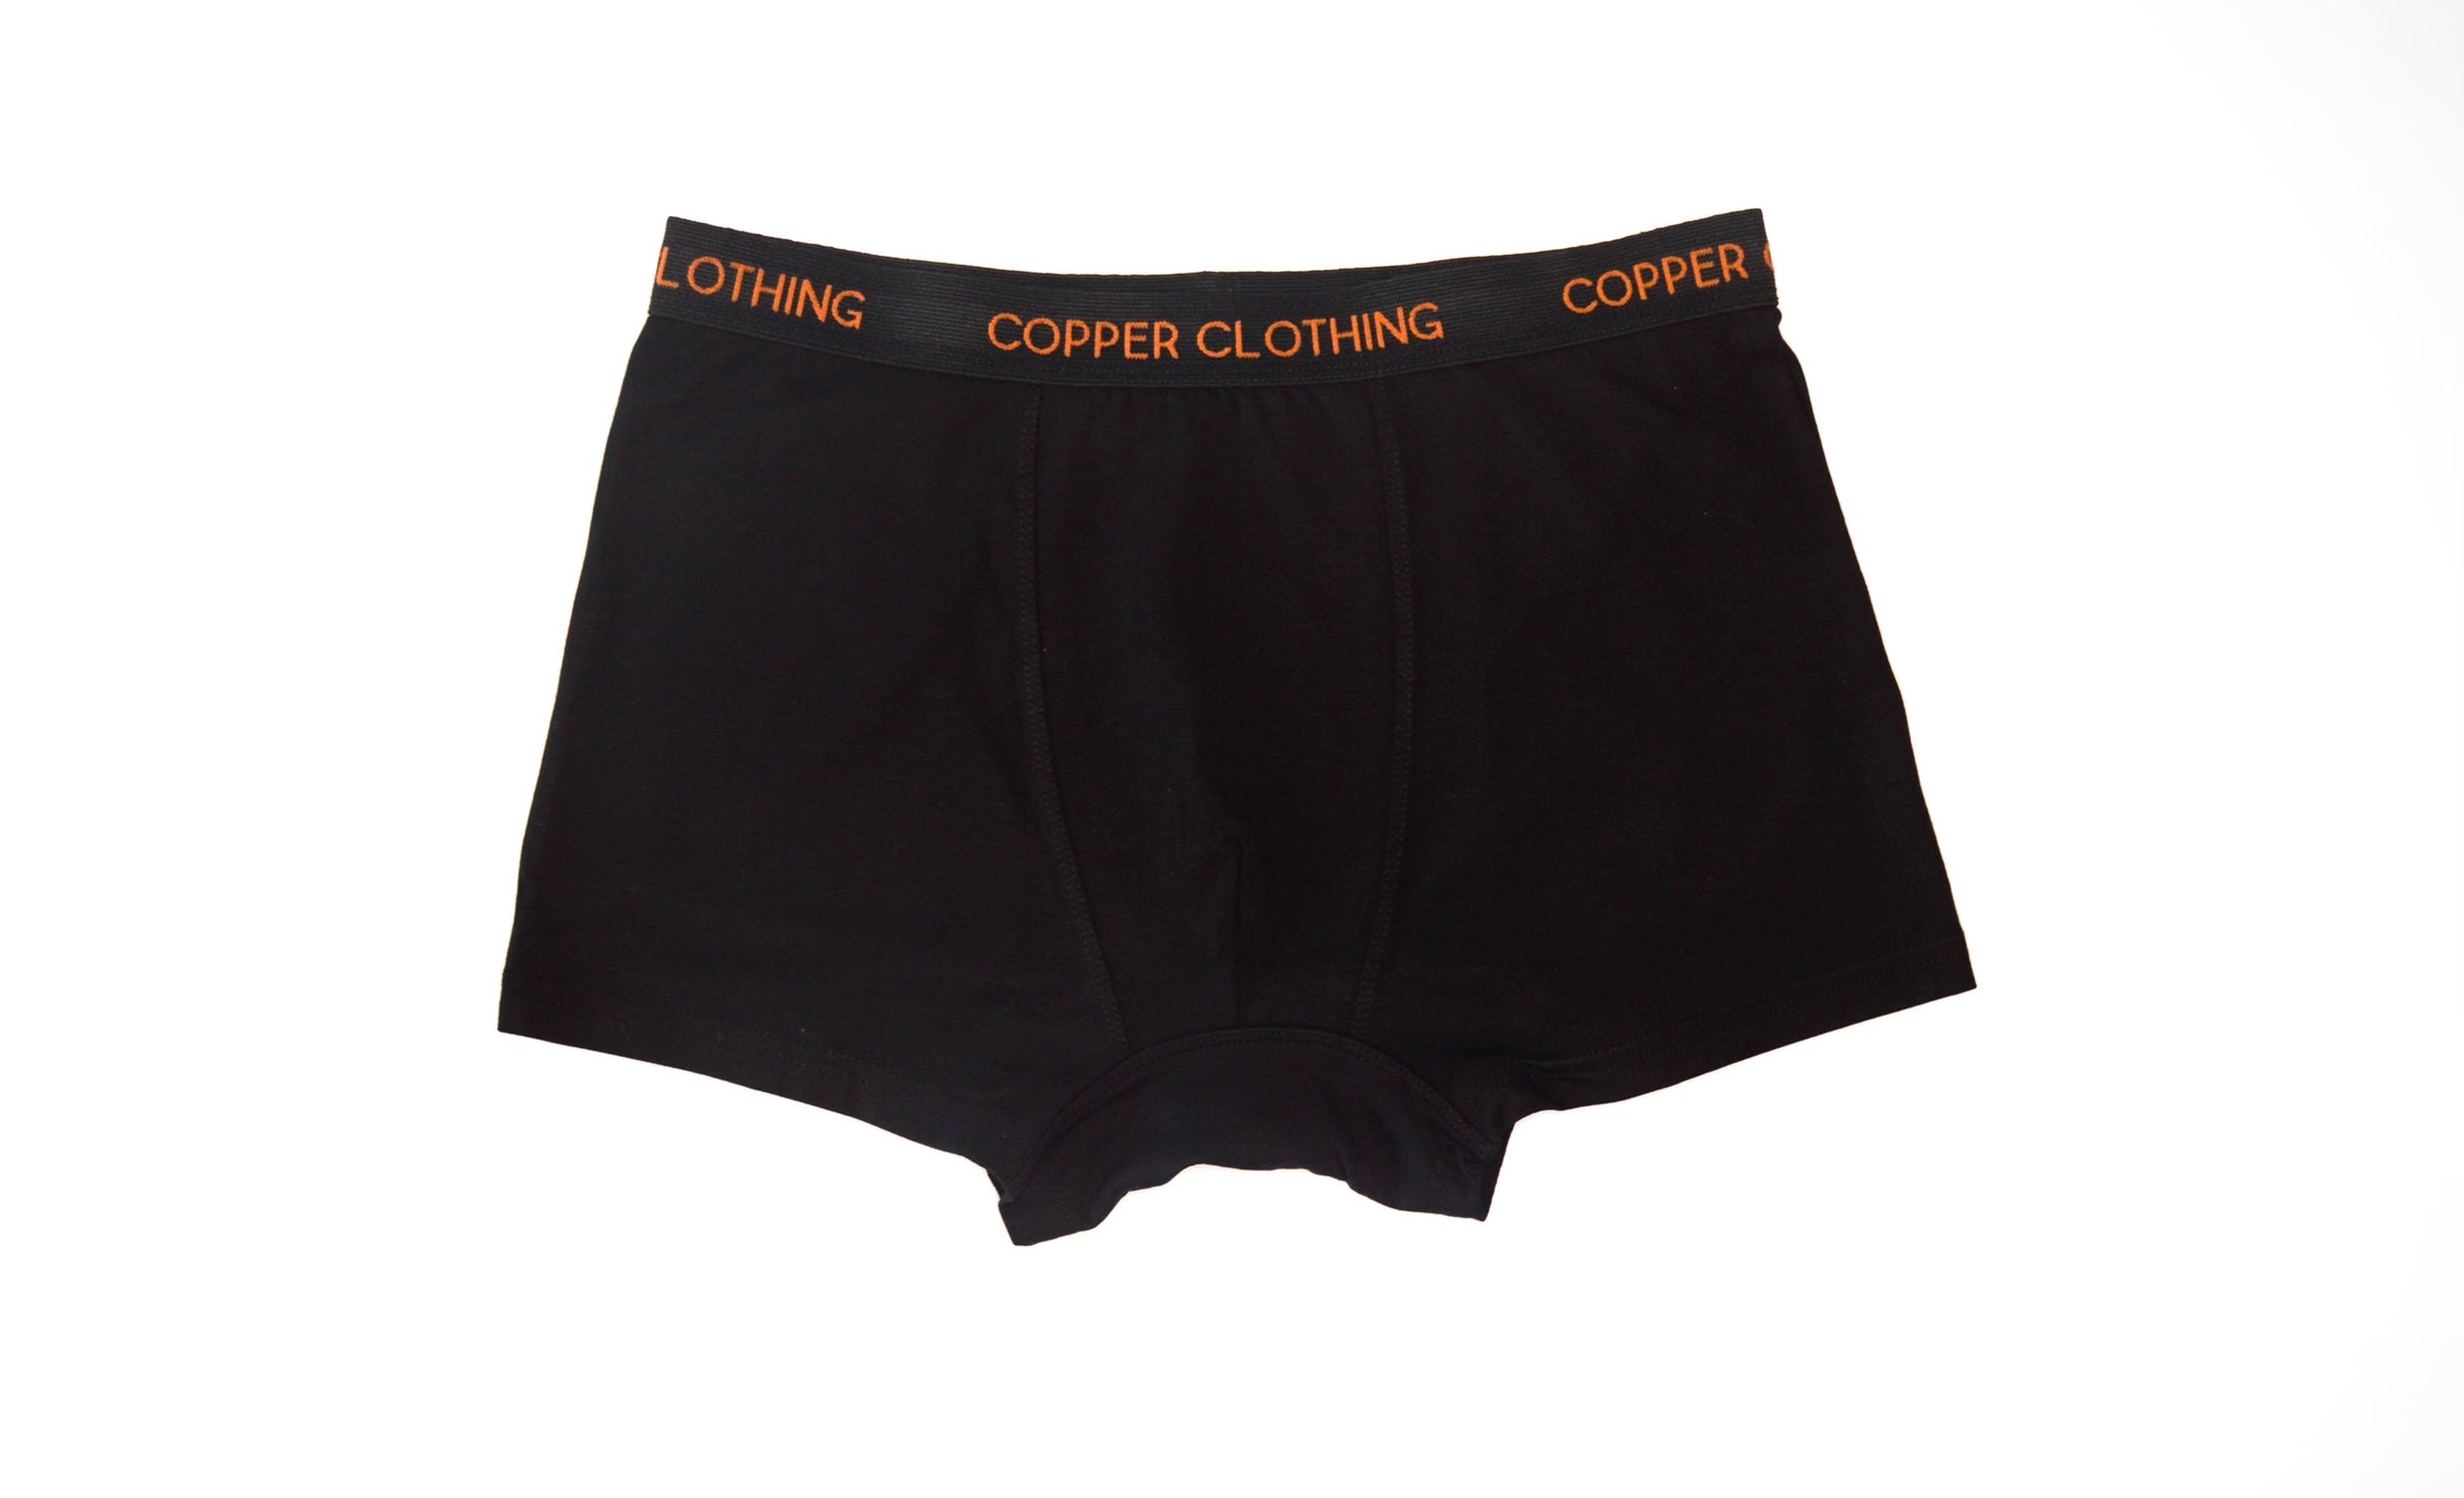 Mens Boxer Shorts (Copper Infused Mens Underwear)